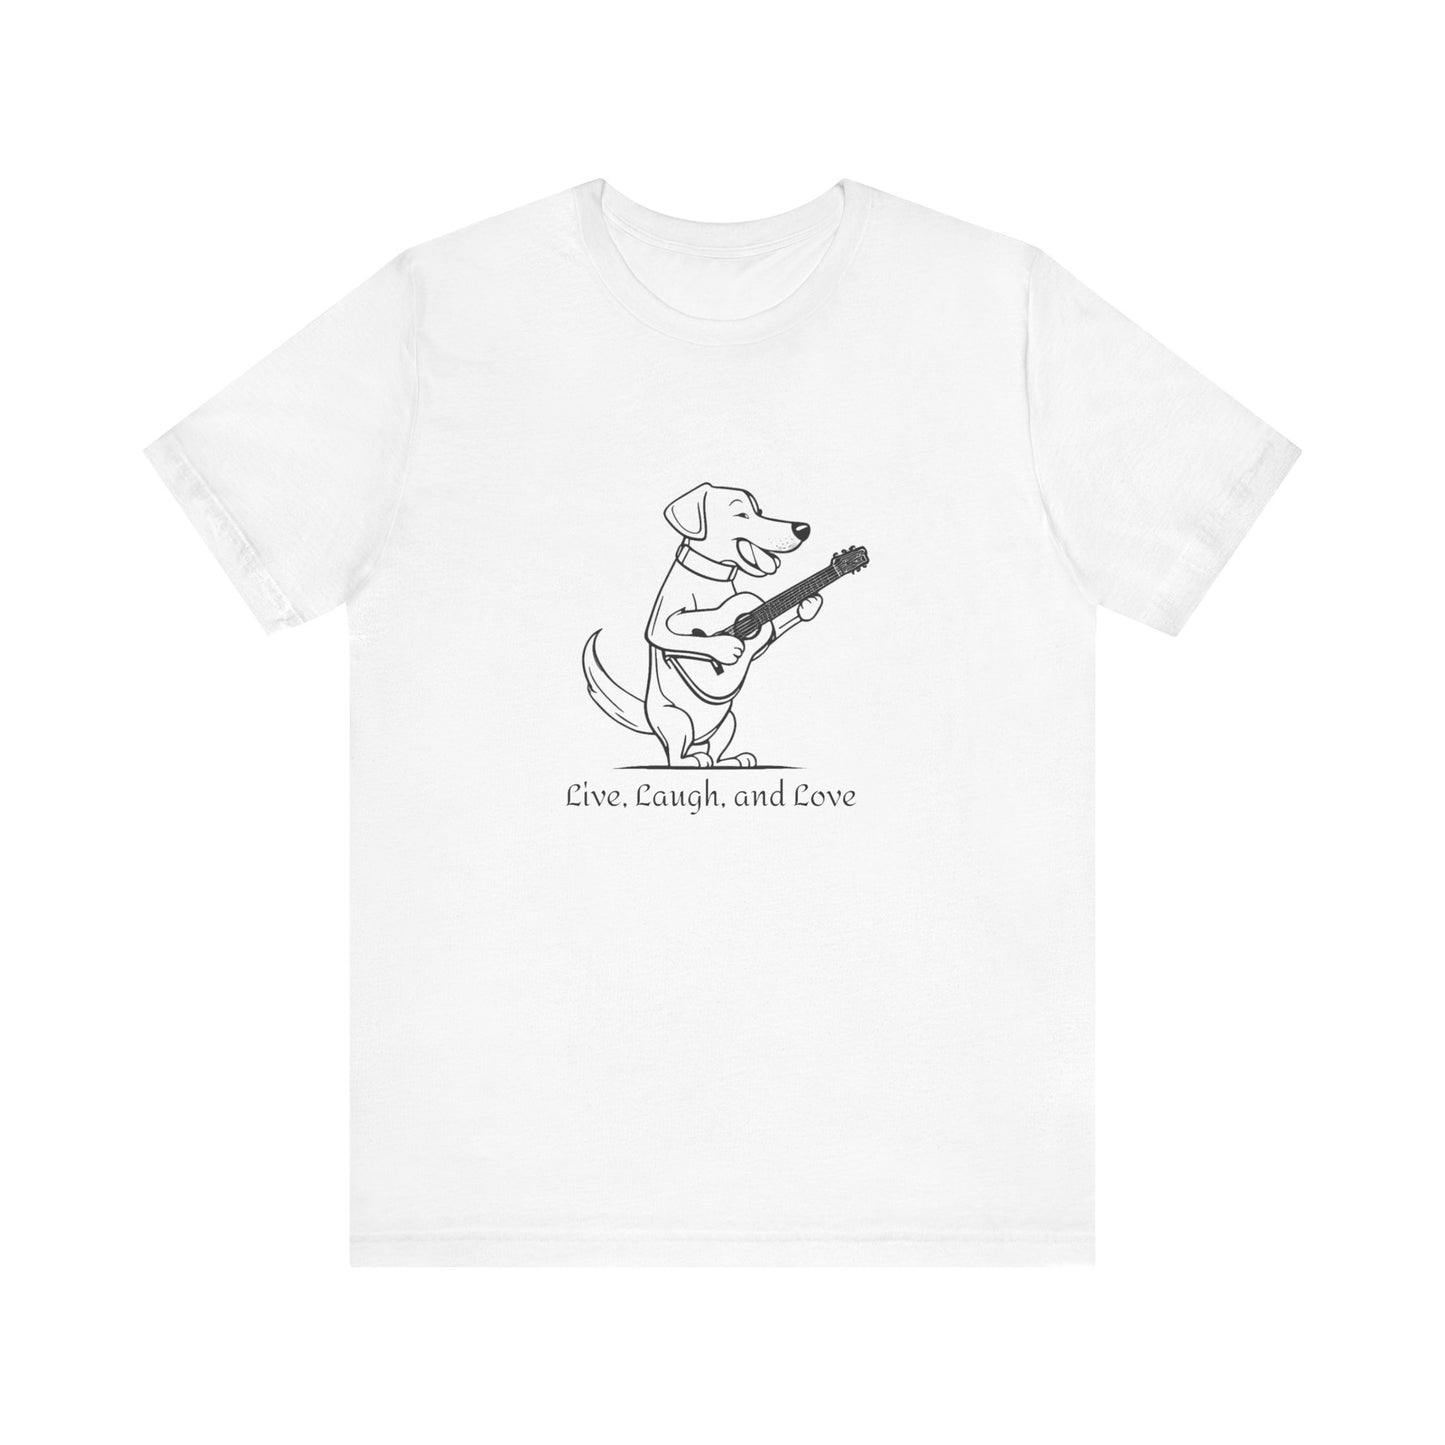 Dog With Guitar. Live, Laugh, and Love. Unisex Jersey Short Sleeve Tee